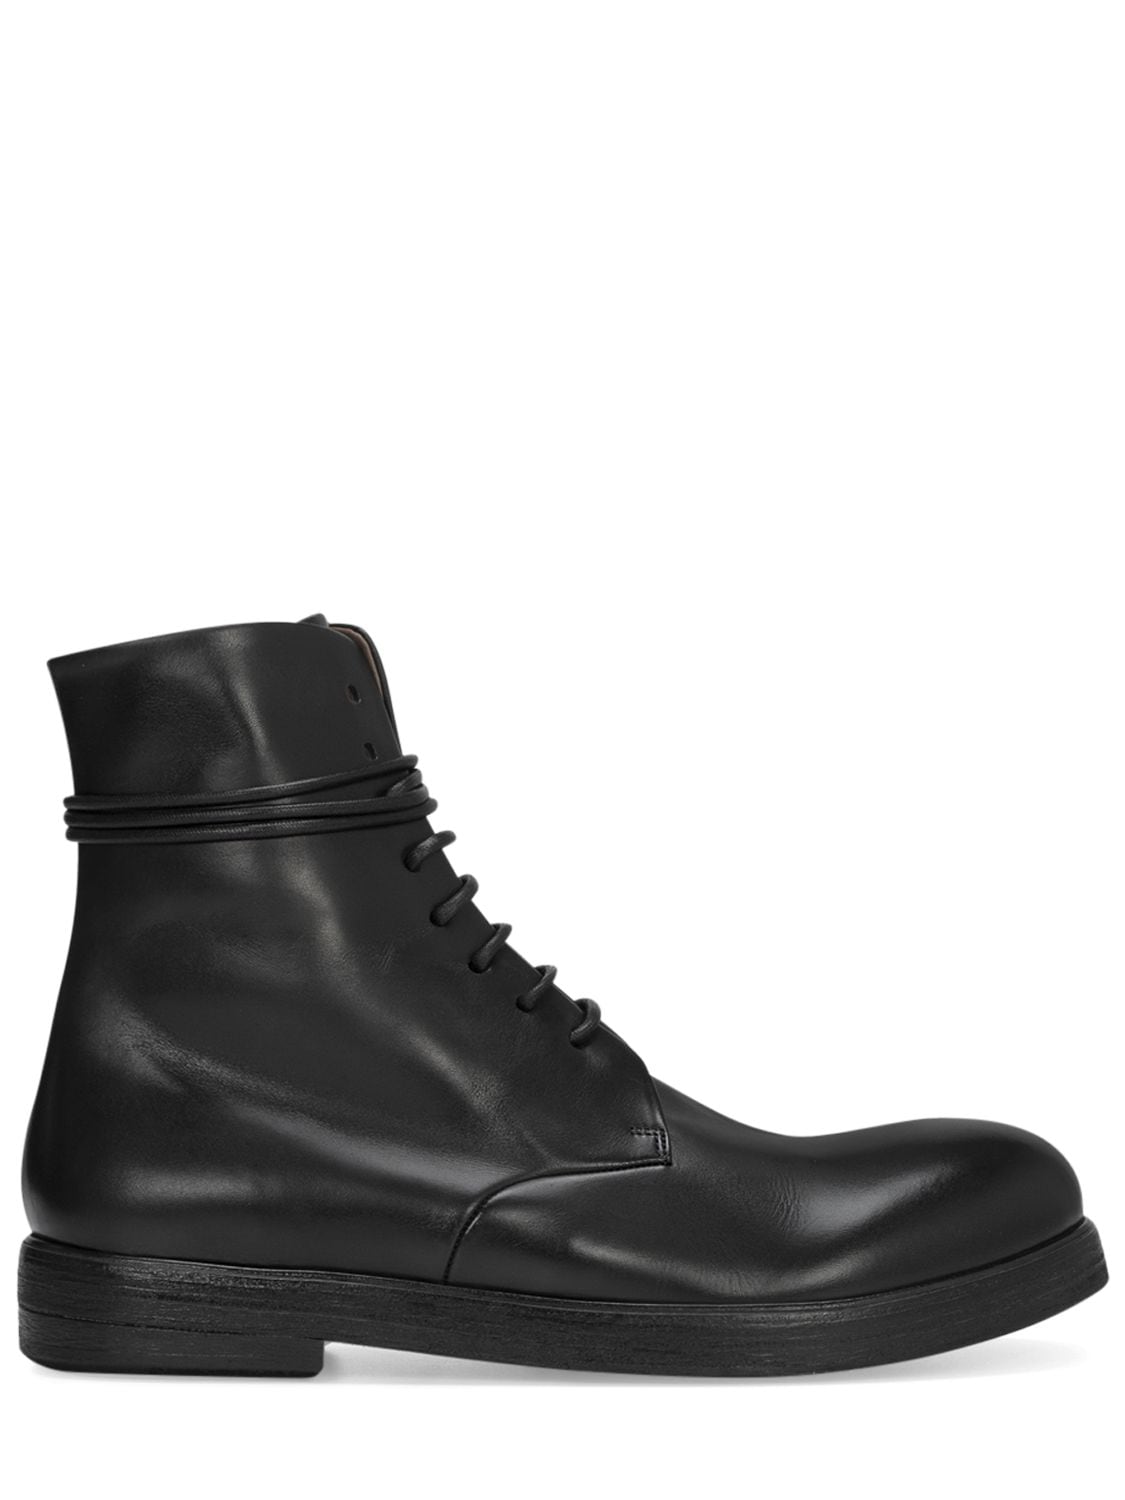 Image of Zucca Zeppa Lace-up Boots